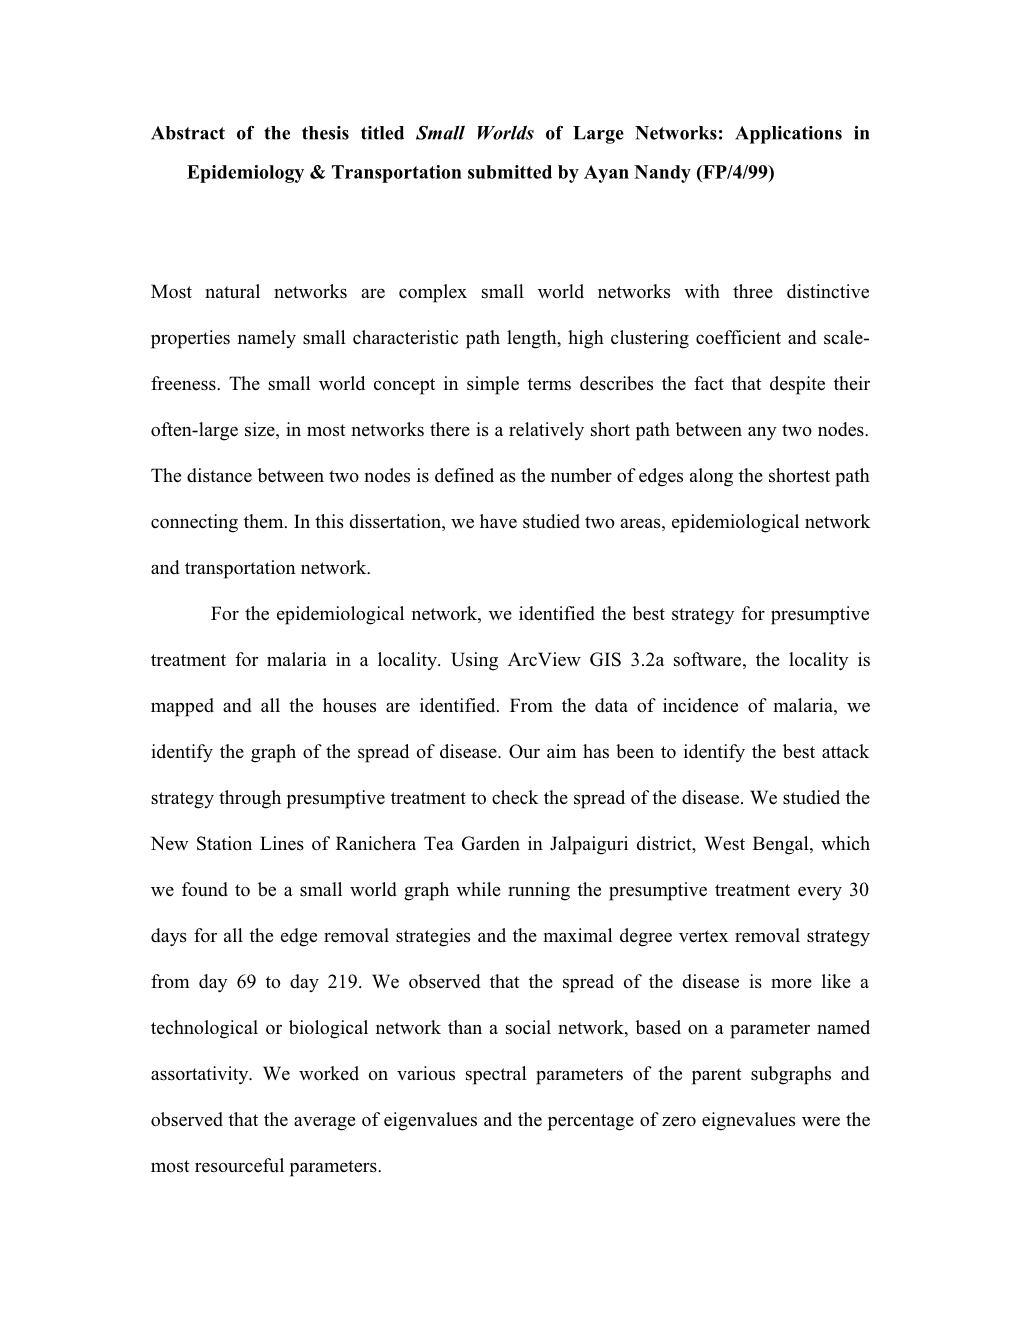 Abstract of the Thesis Titled Small Worlds of Large Networks: Applications in Epidemiology